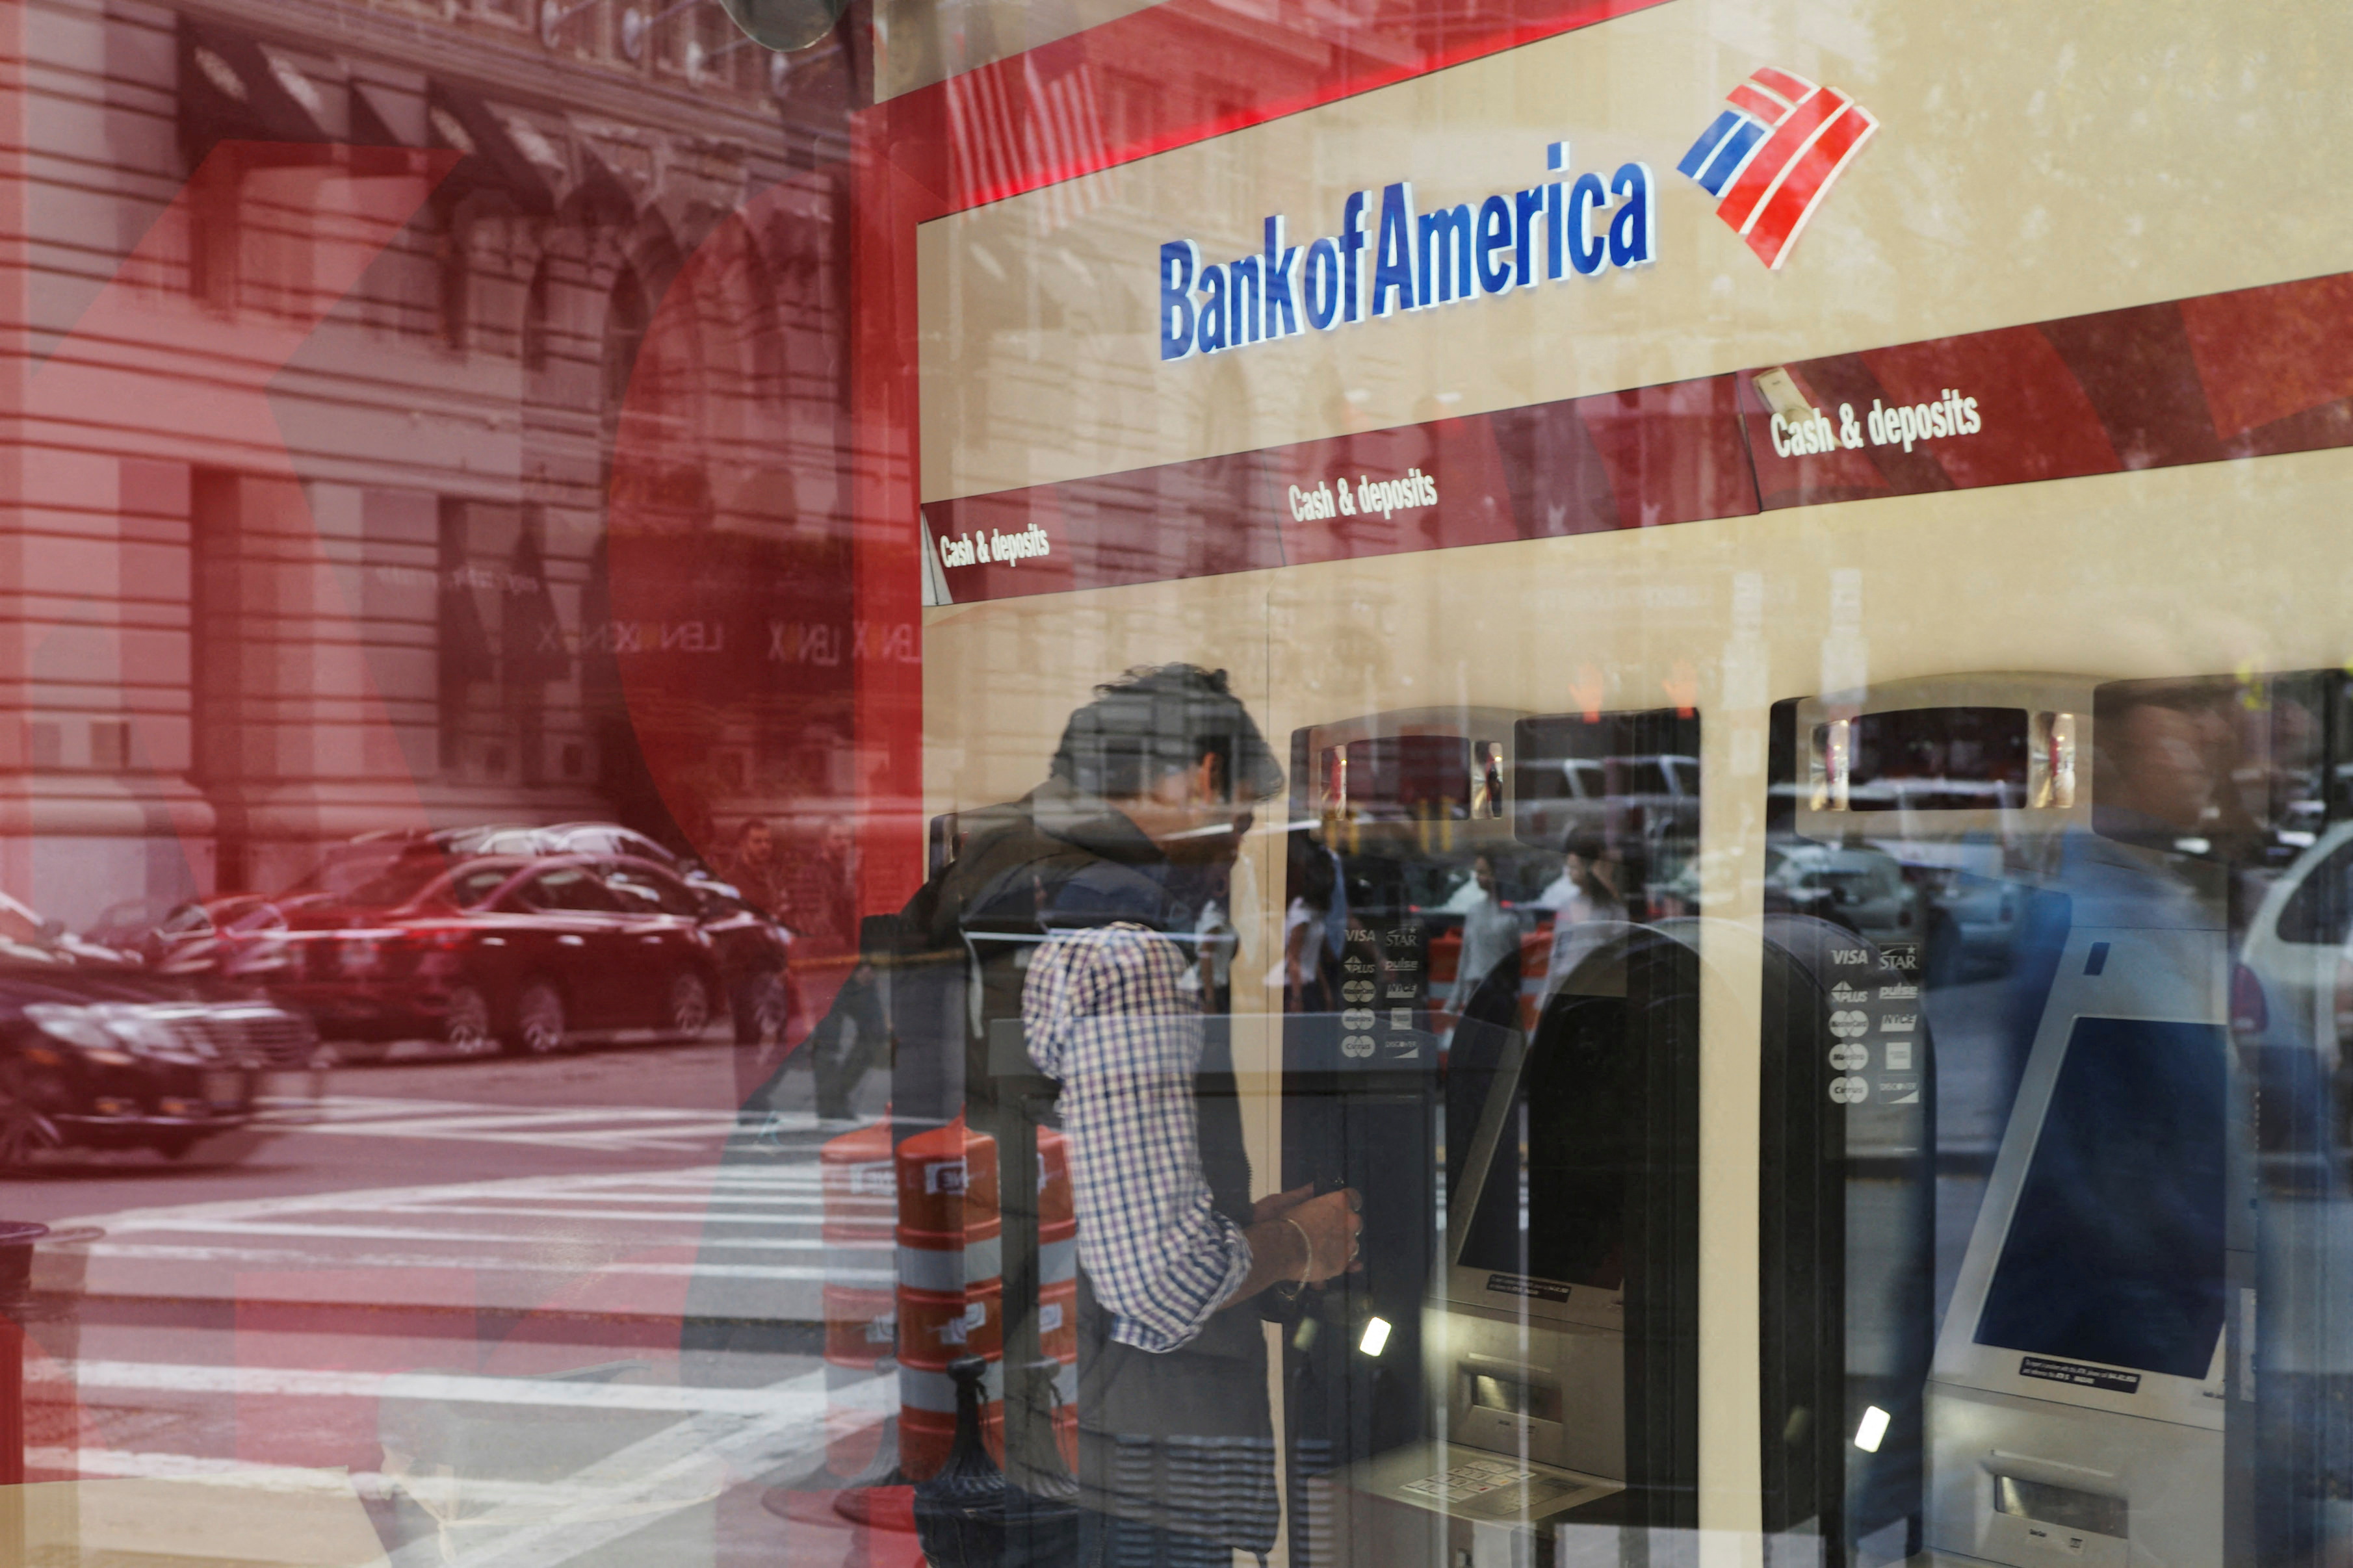 A customer uses an ATM at a Bank of America branch in Boston, Massachusetts, U.S., October 11, 2017. REUTERS/Brian Snyder/File Photo